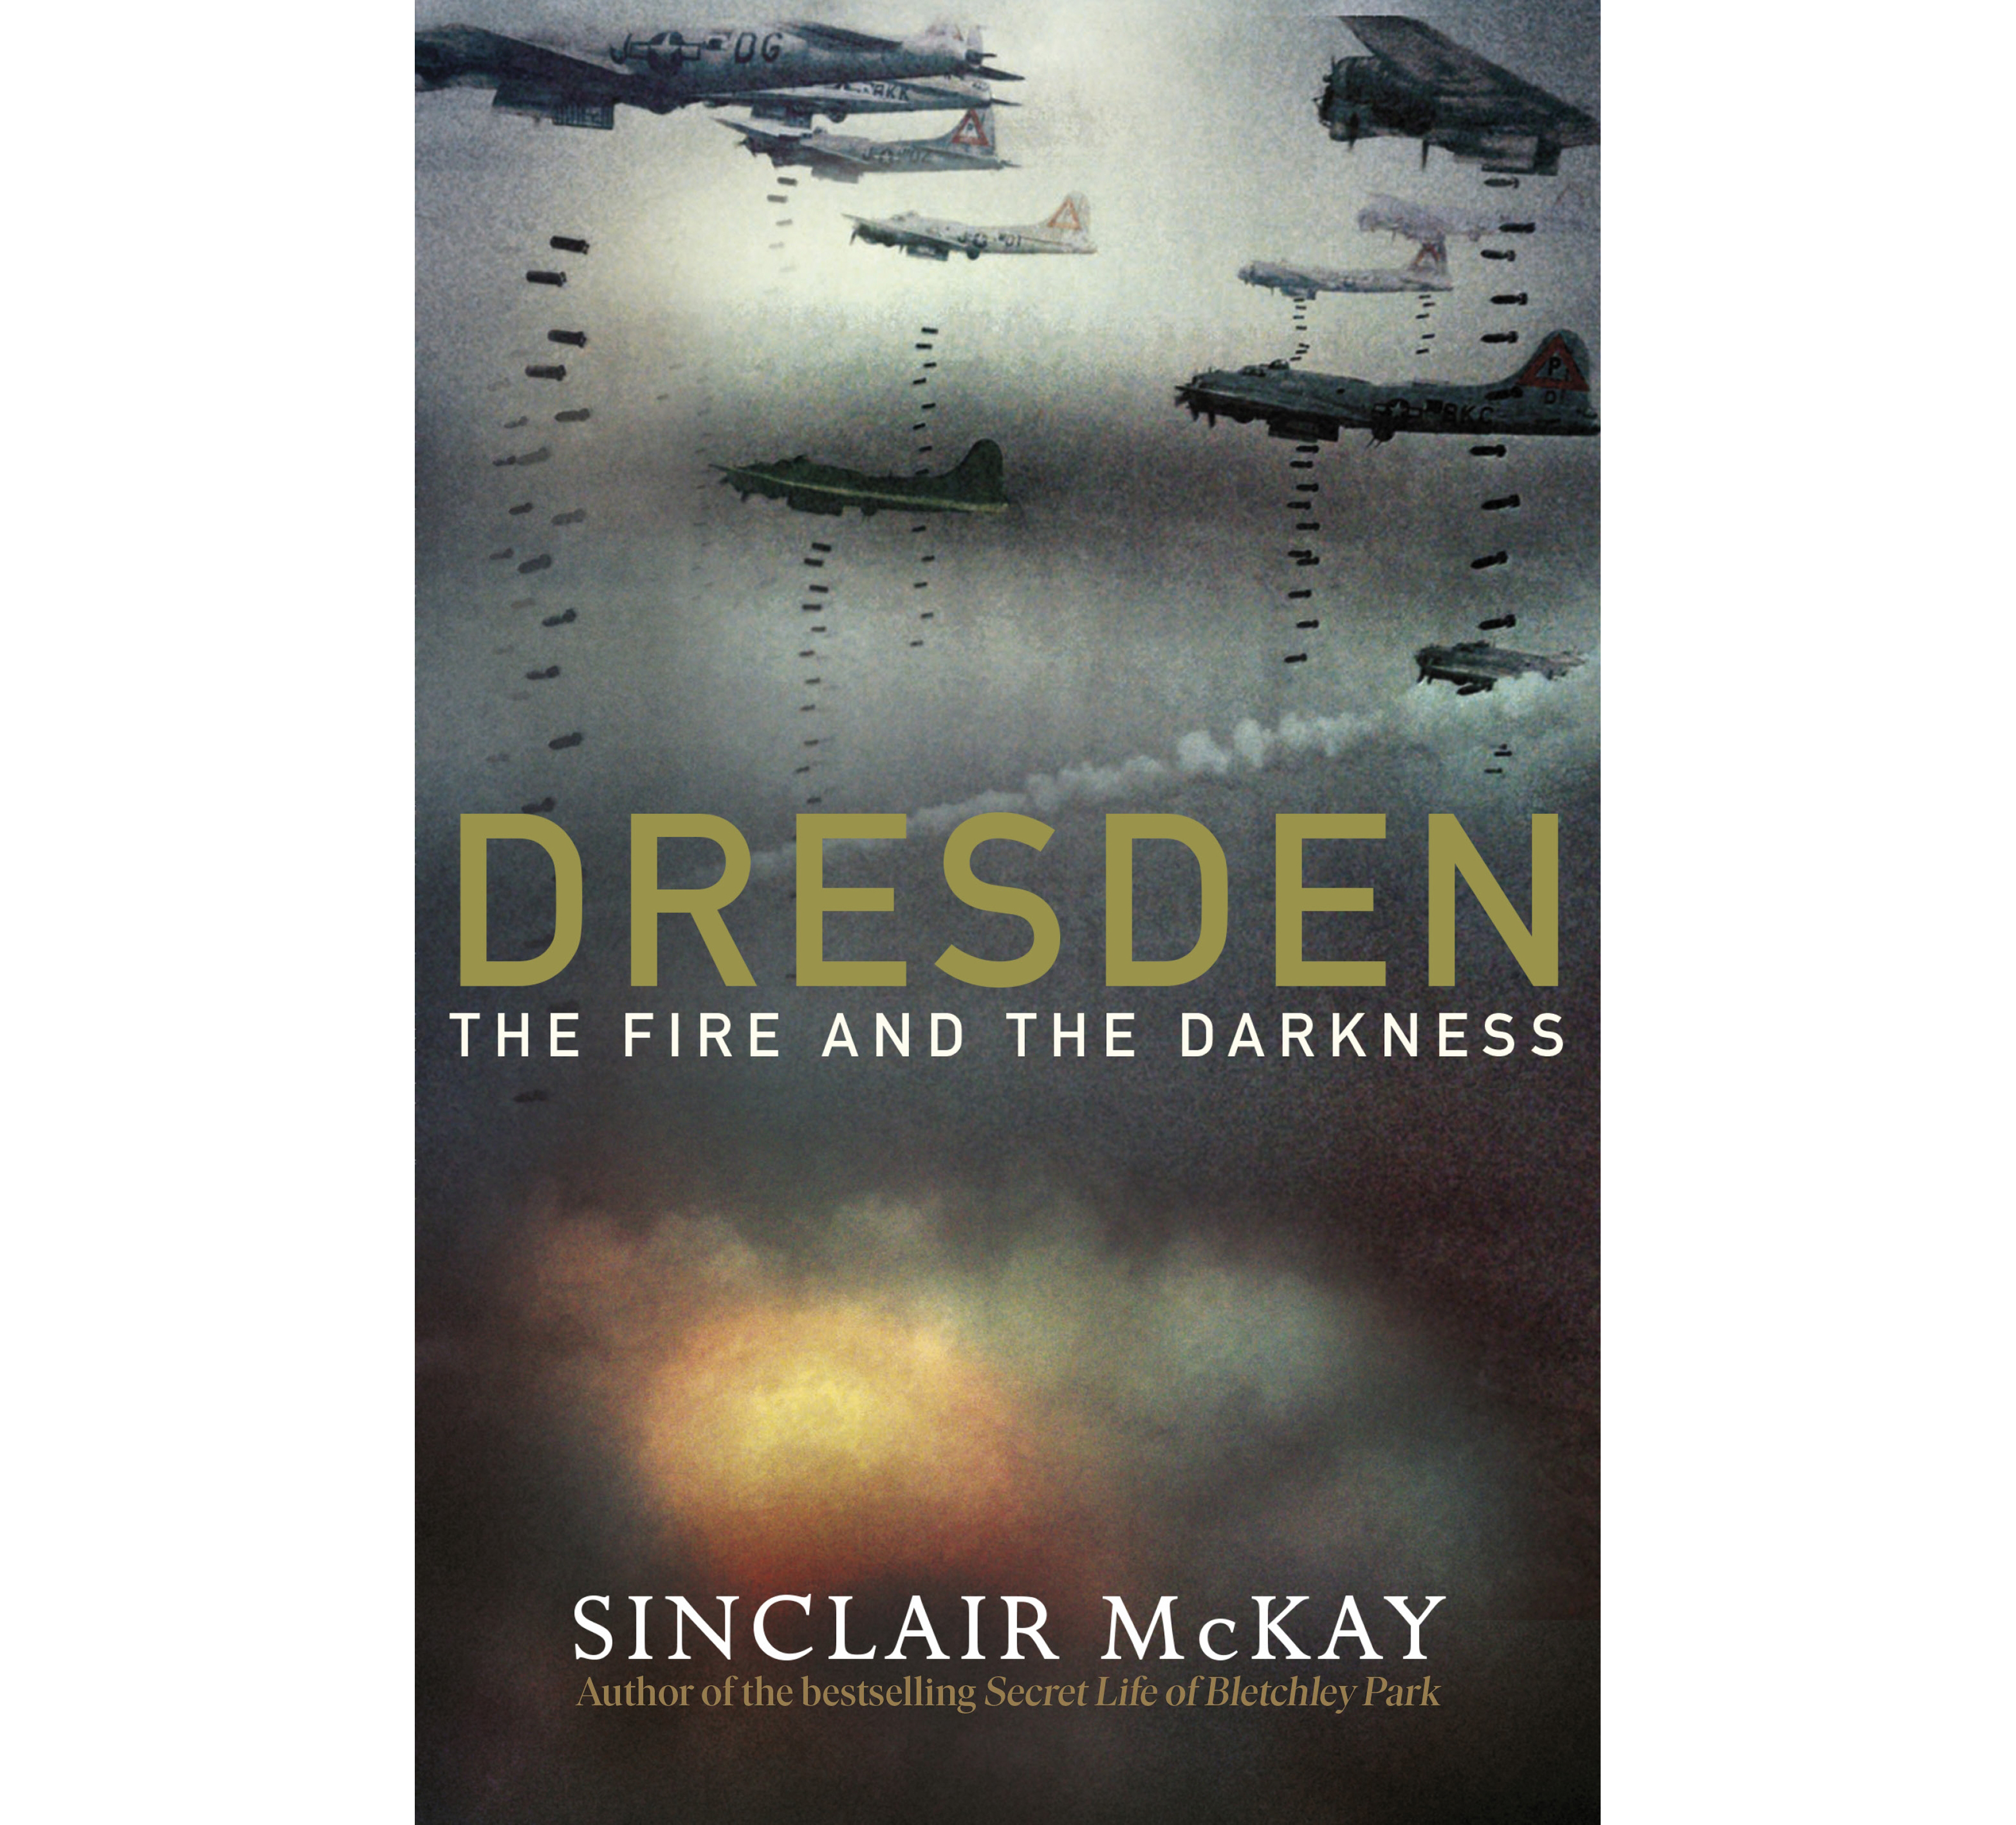 Dresden: The Fire And The Darkness by Sinclair McKay (Viking/PA)